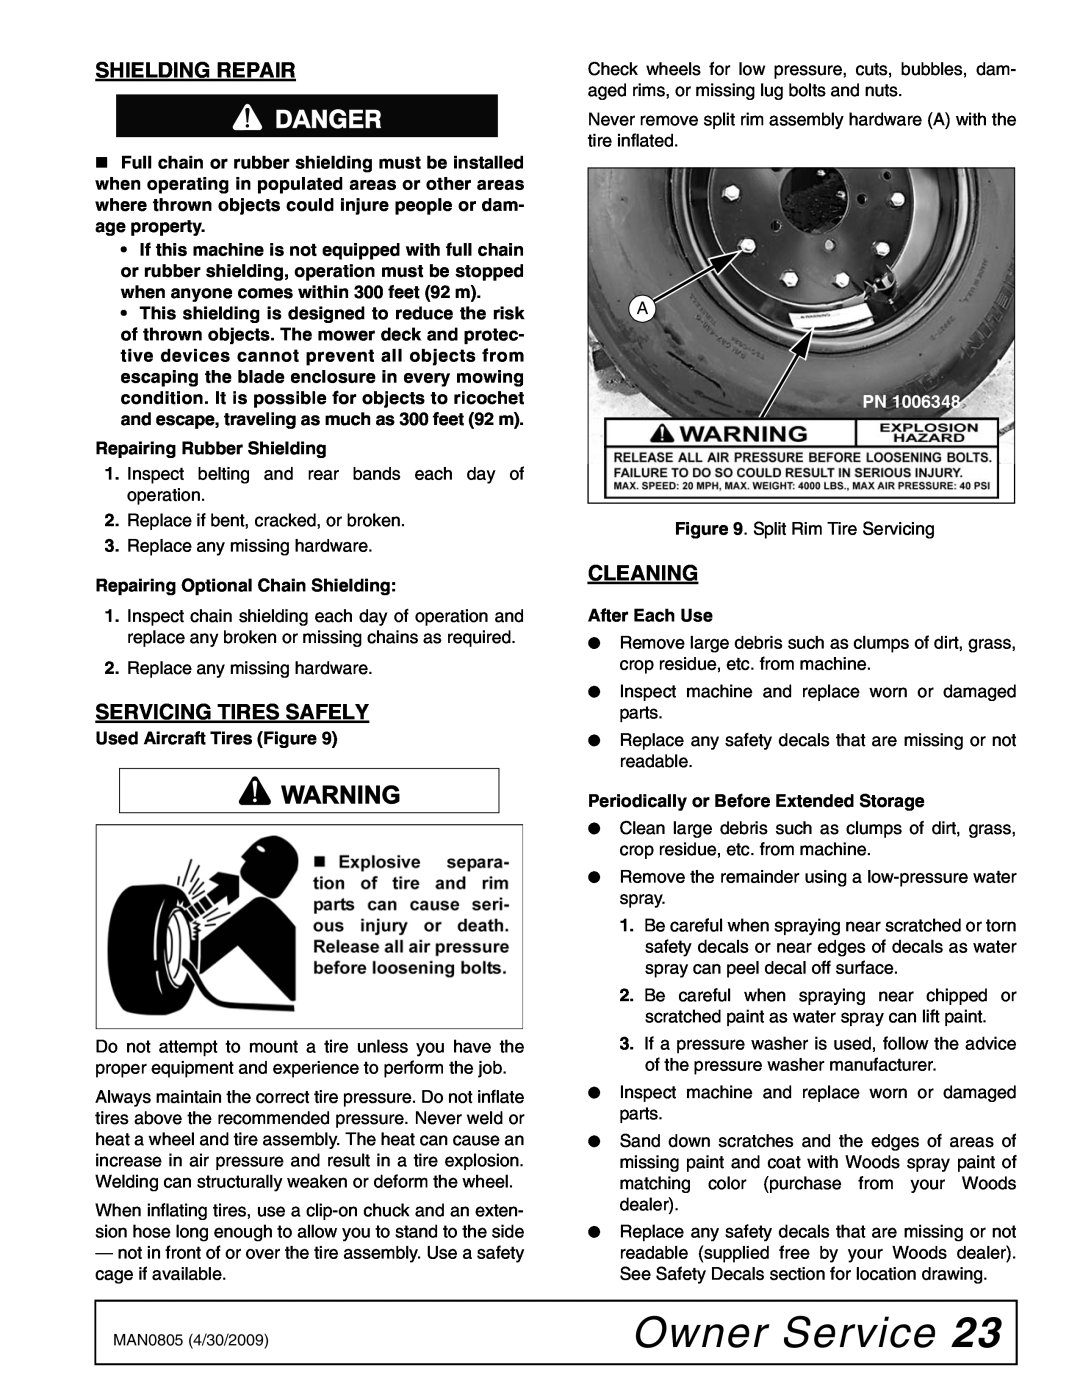 Woods Equipment BW180HDQ Owner Service, Shielding Repair, Servicing Tires Safely, Cleaning, Repairing Rubber Shielding 